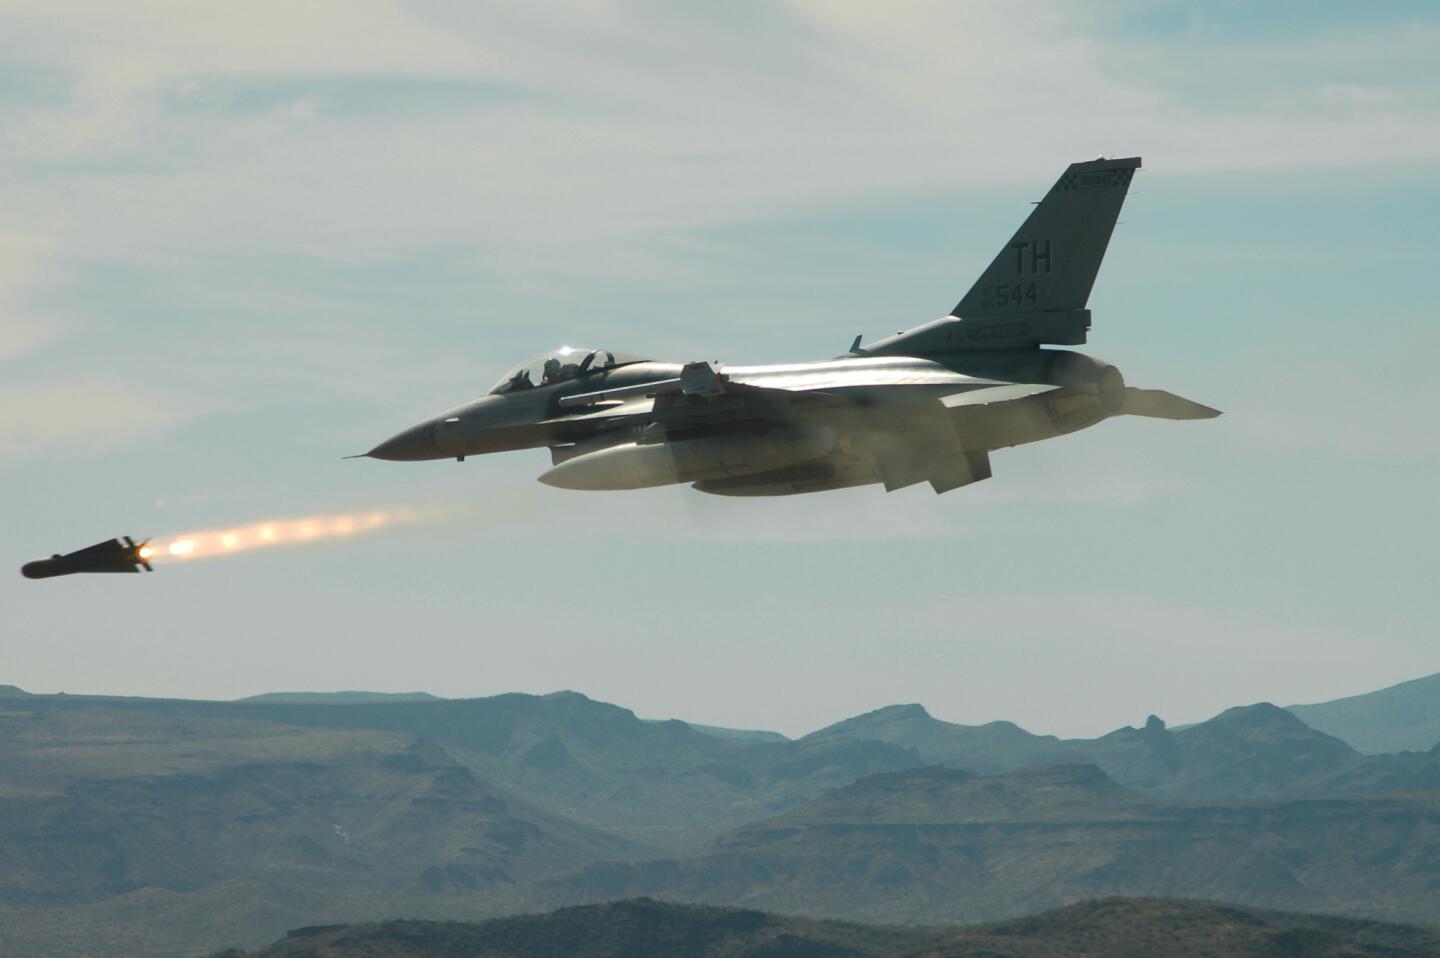 An air-to-ground tactical missile, the AGM-65 Maverick is used for close air support.